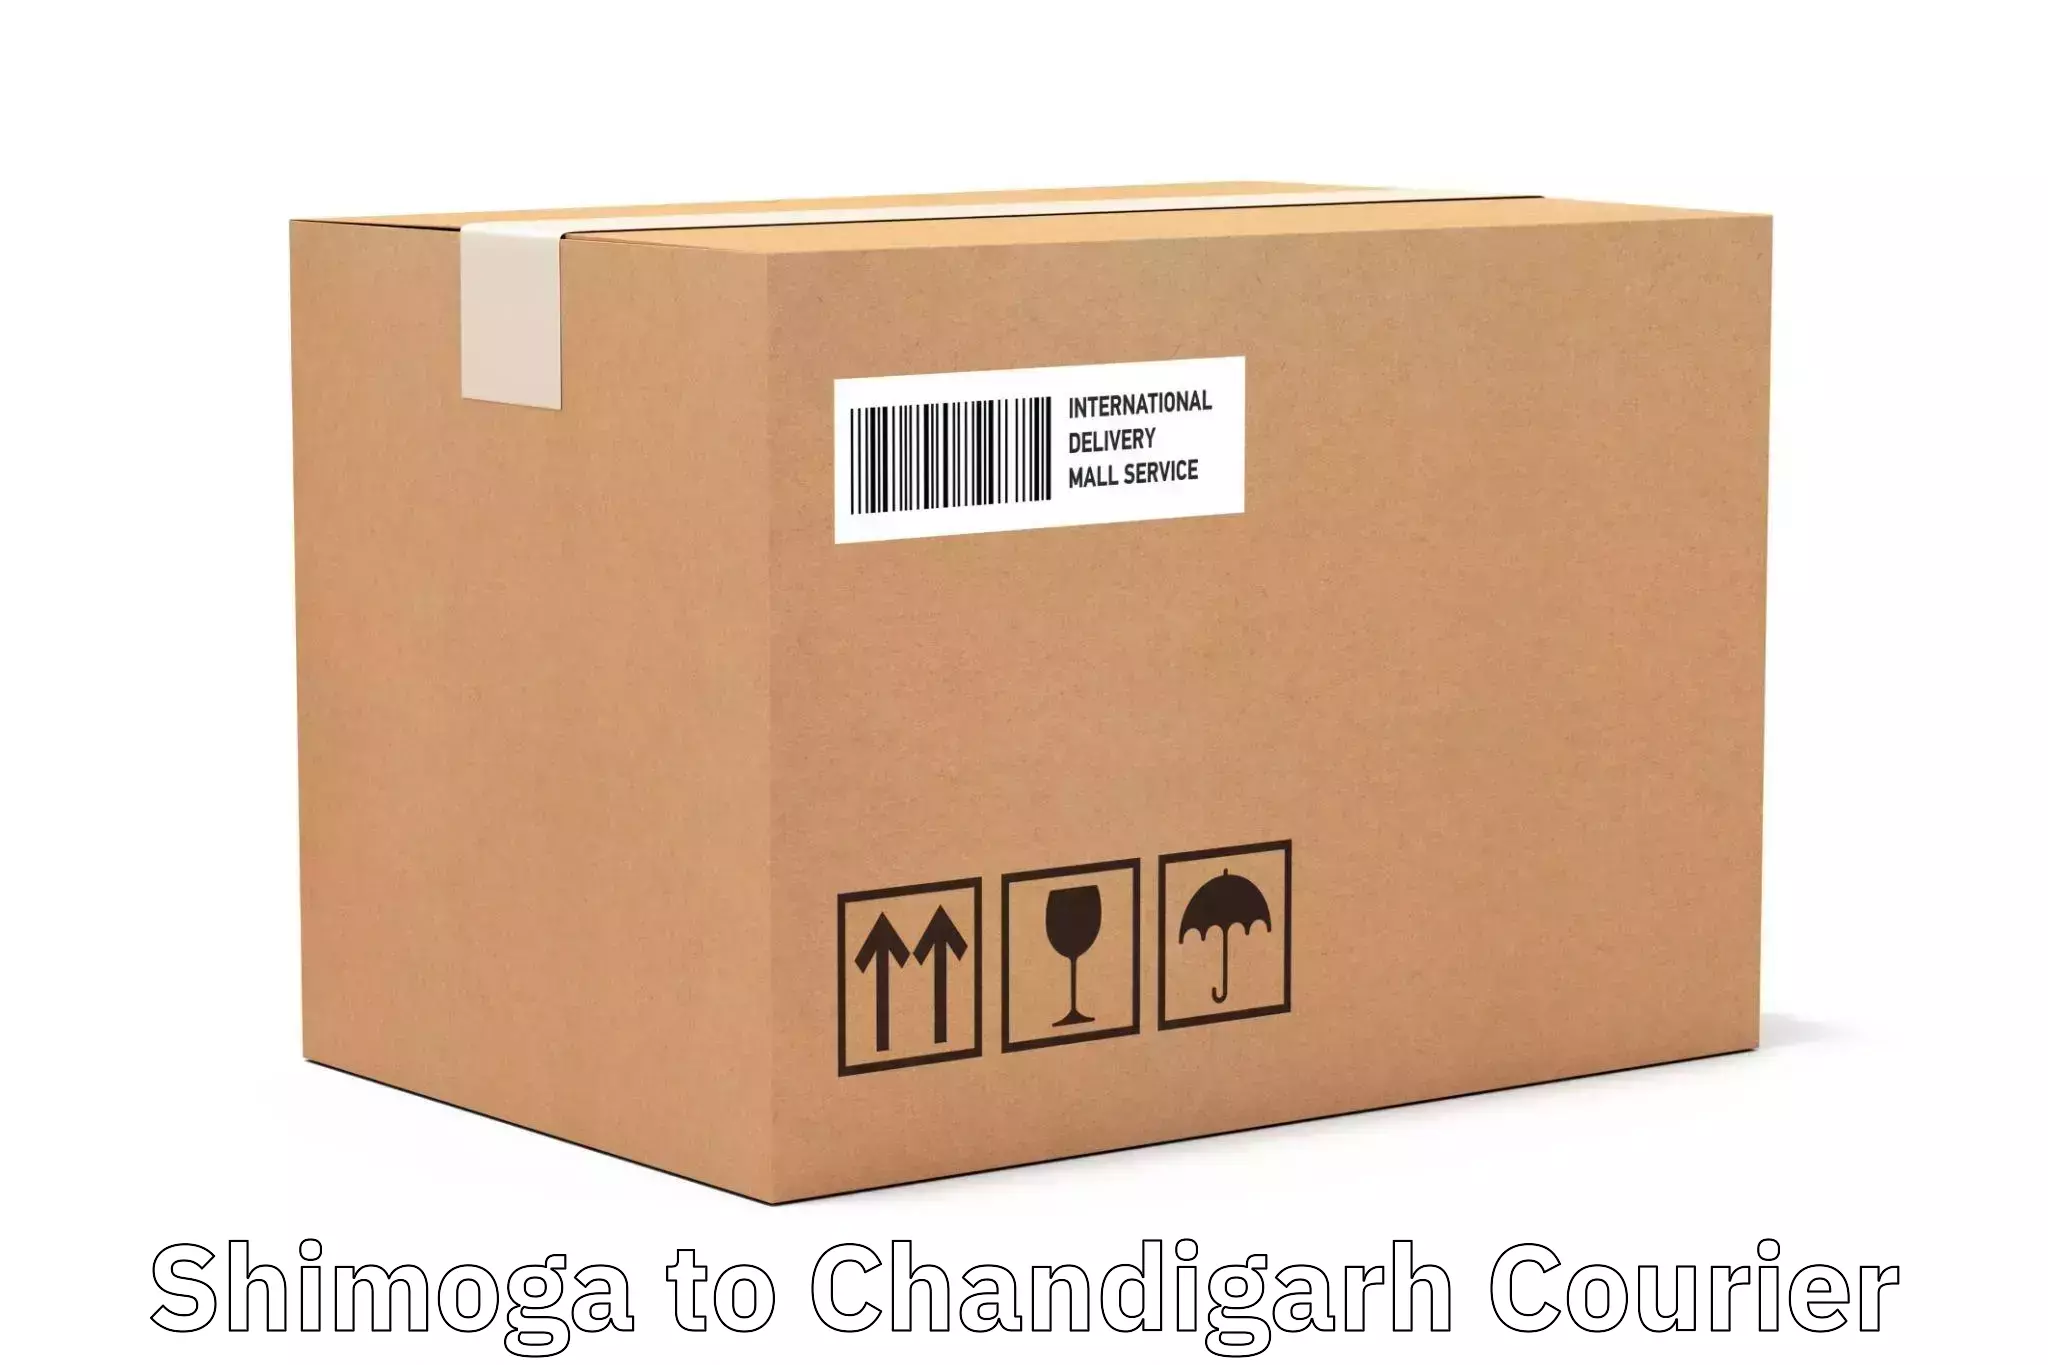 State-of-the-art courier technology Shimoga to Chandigarh